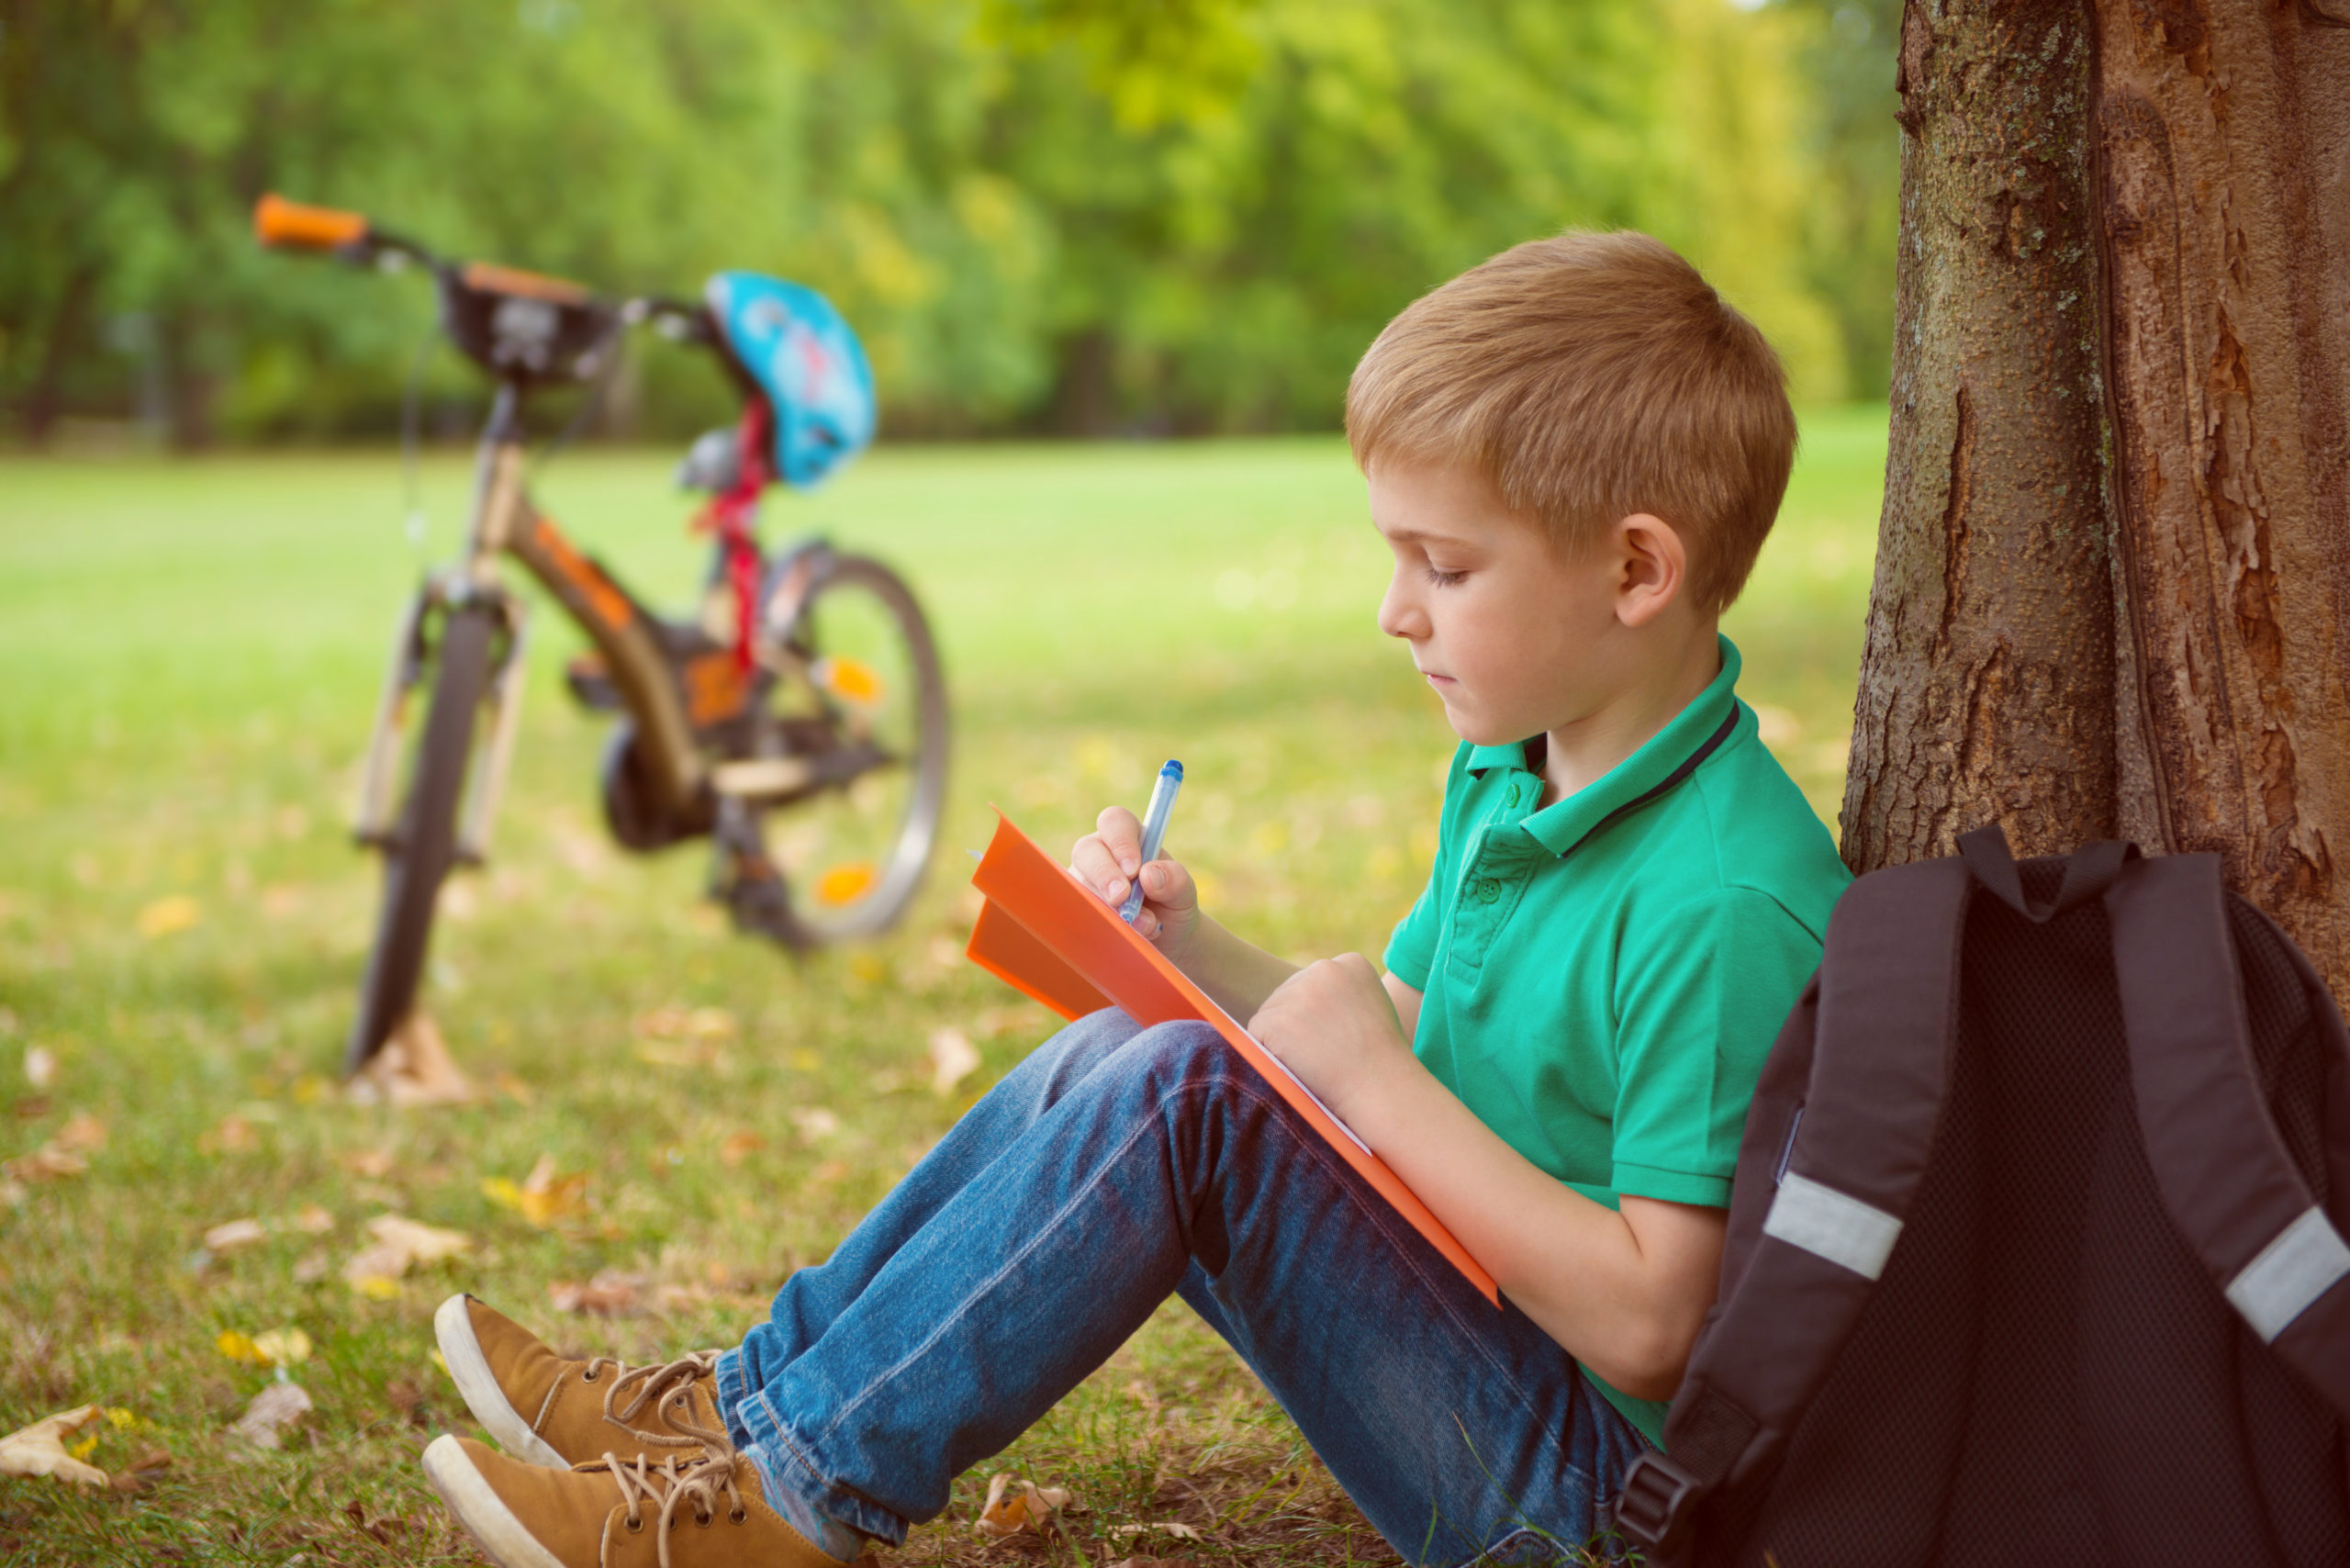 boy leaning against tree and writing with bicycle in background on the grass | summer learning ideas for kids